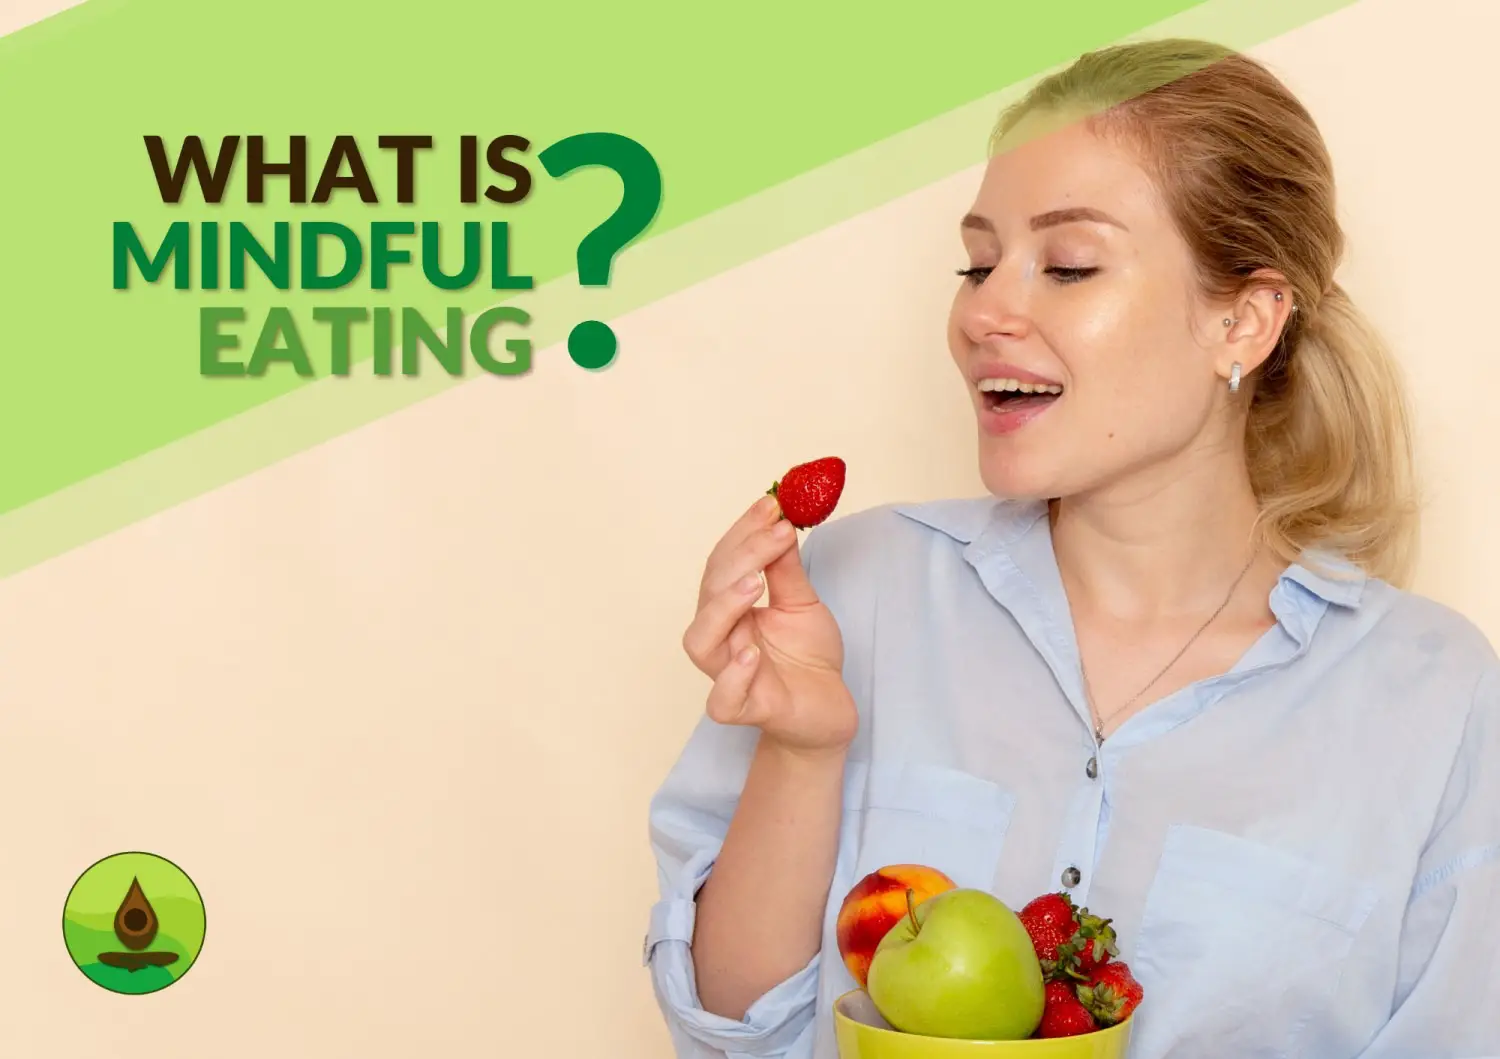 benefits of mindful eating